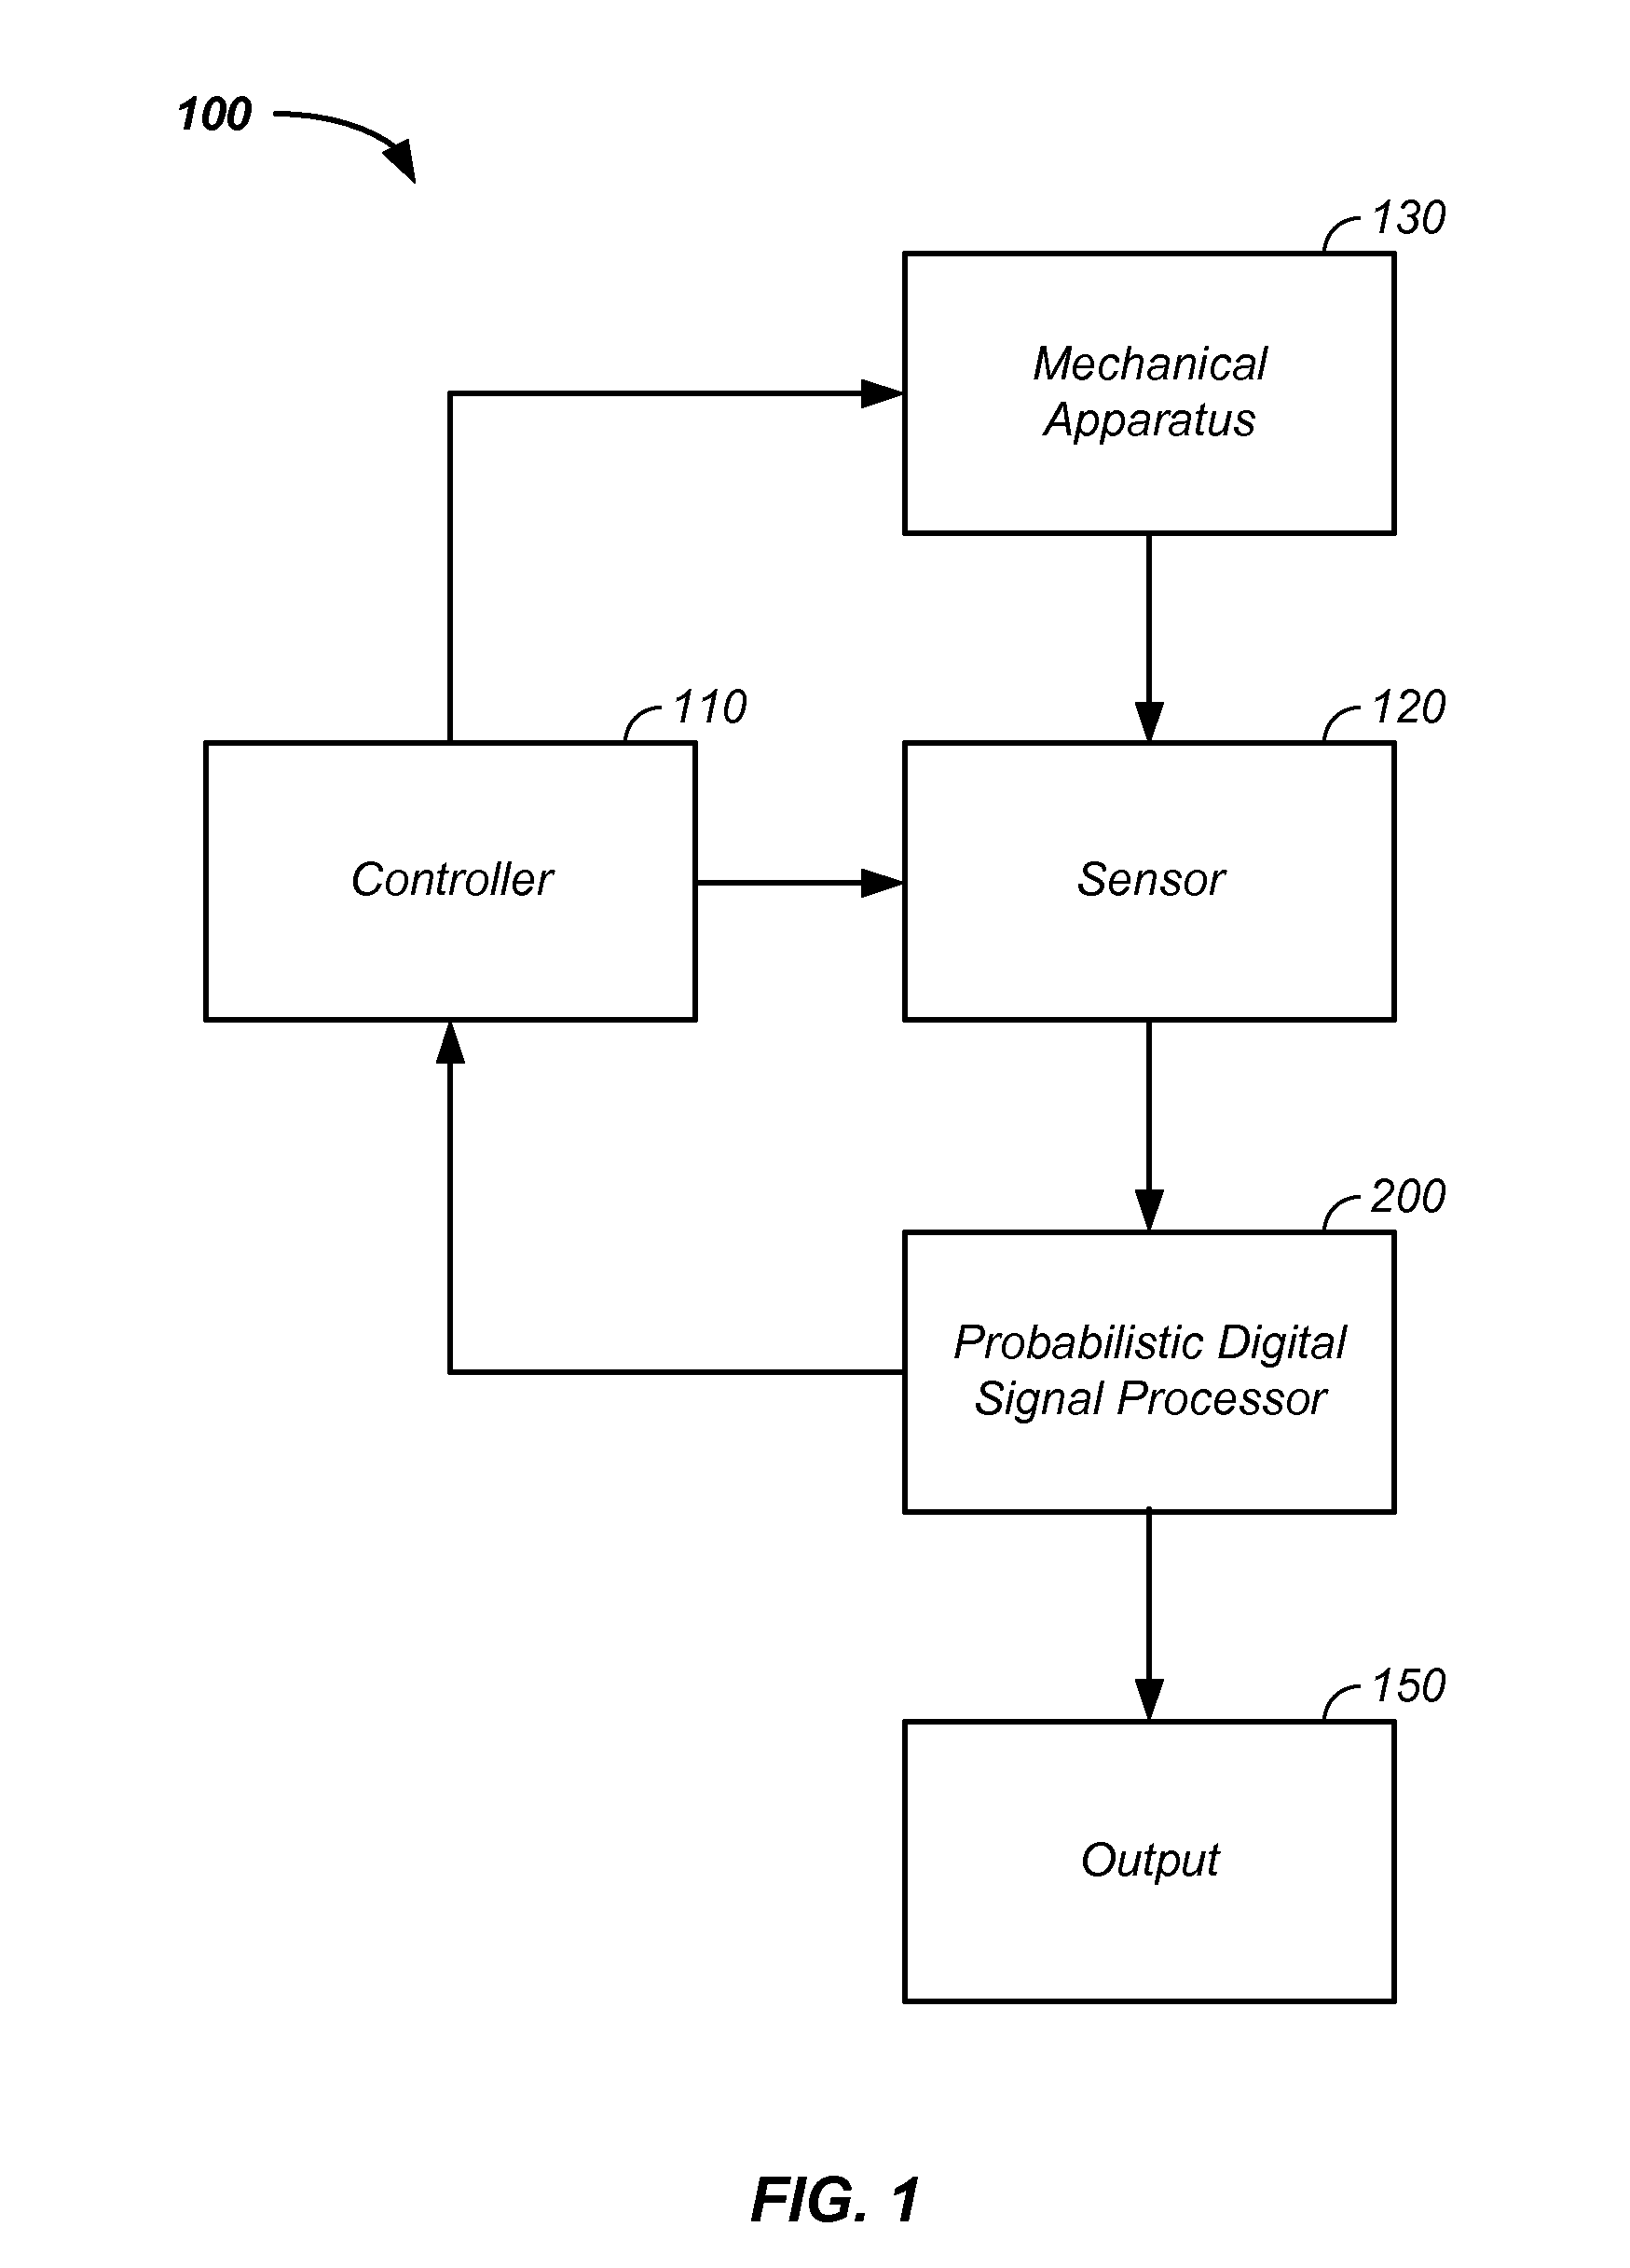 Mechanical health monitor apparatus and method of operation therefor